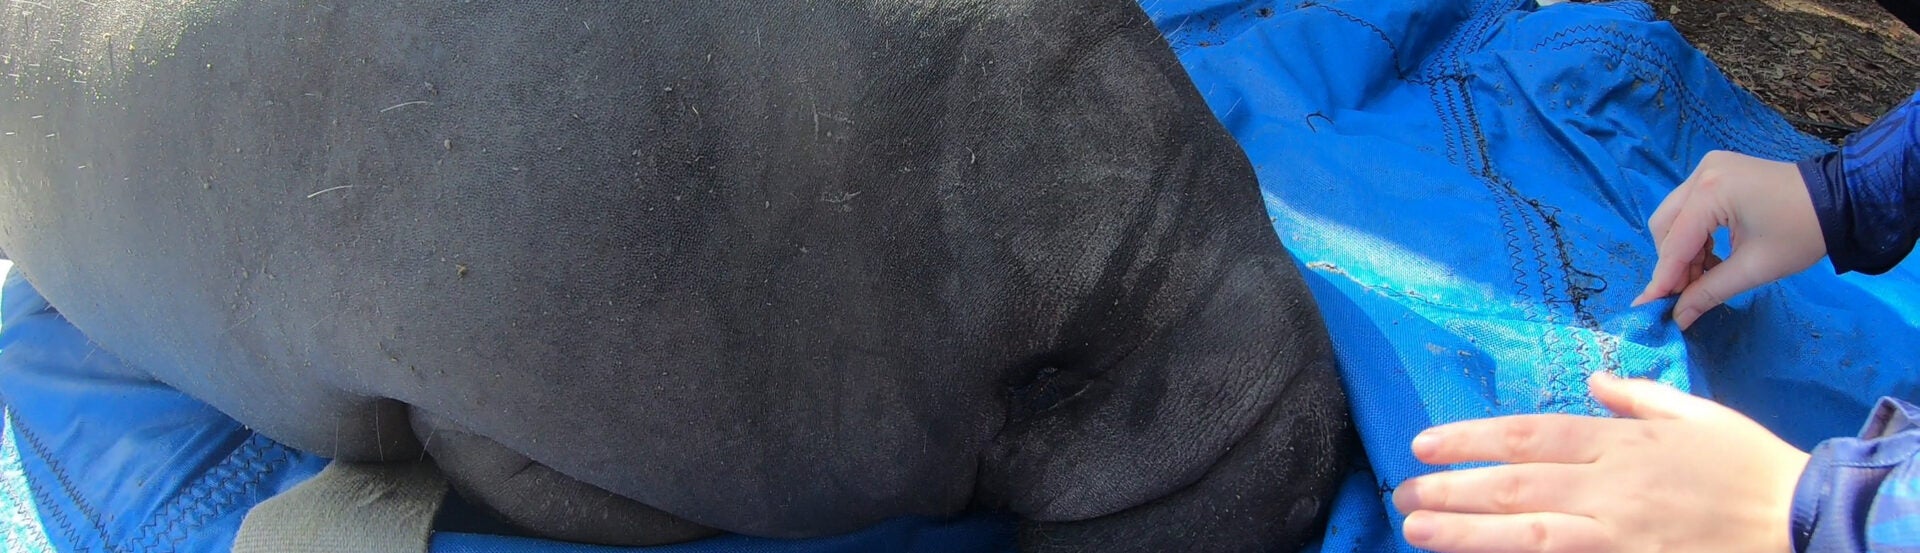 Five Rehabilitated Manatees Return to Florida Waters After Several Years of Rehabilitation